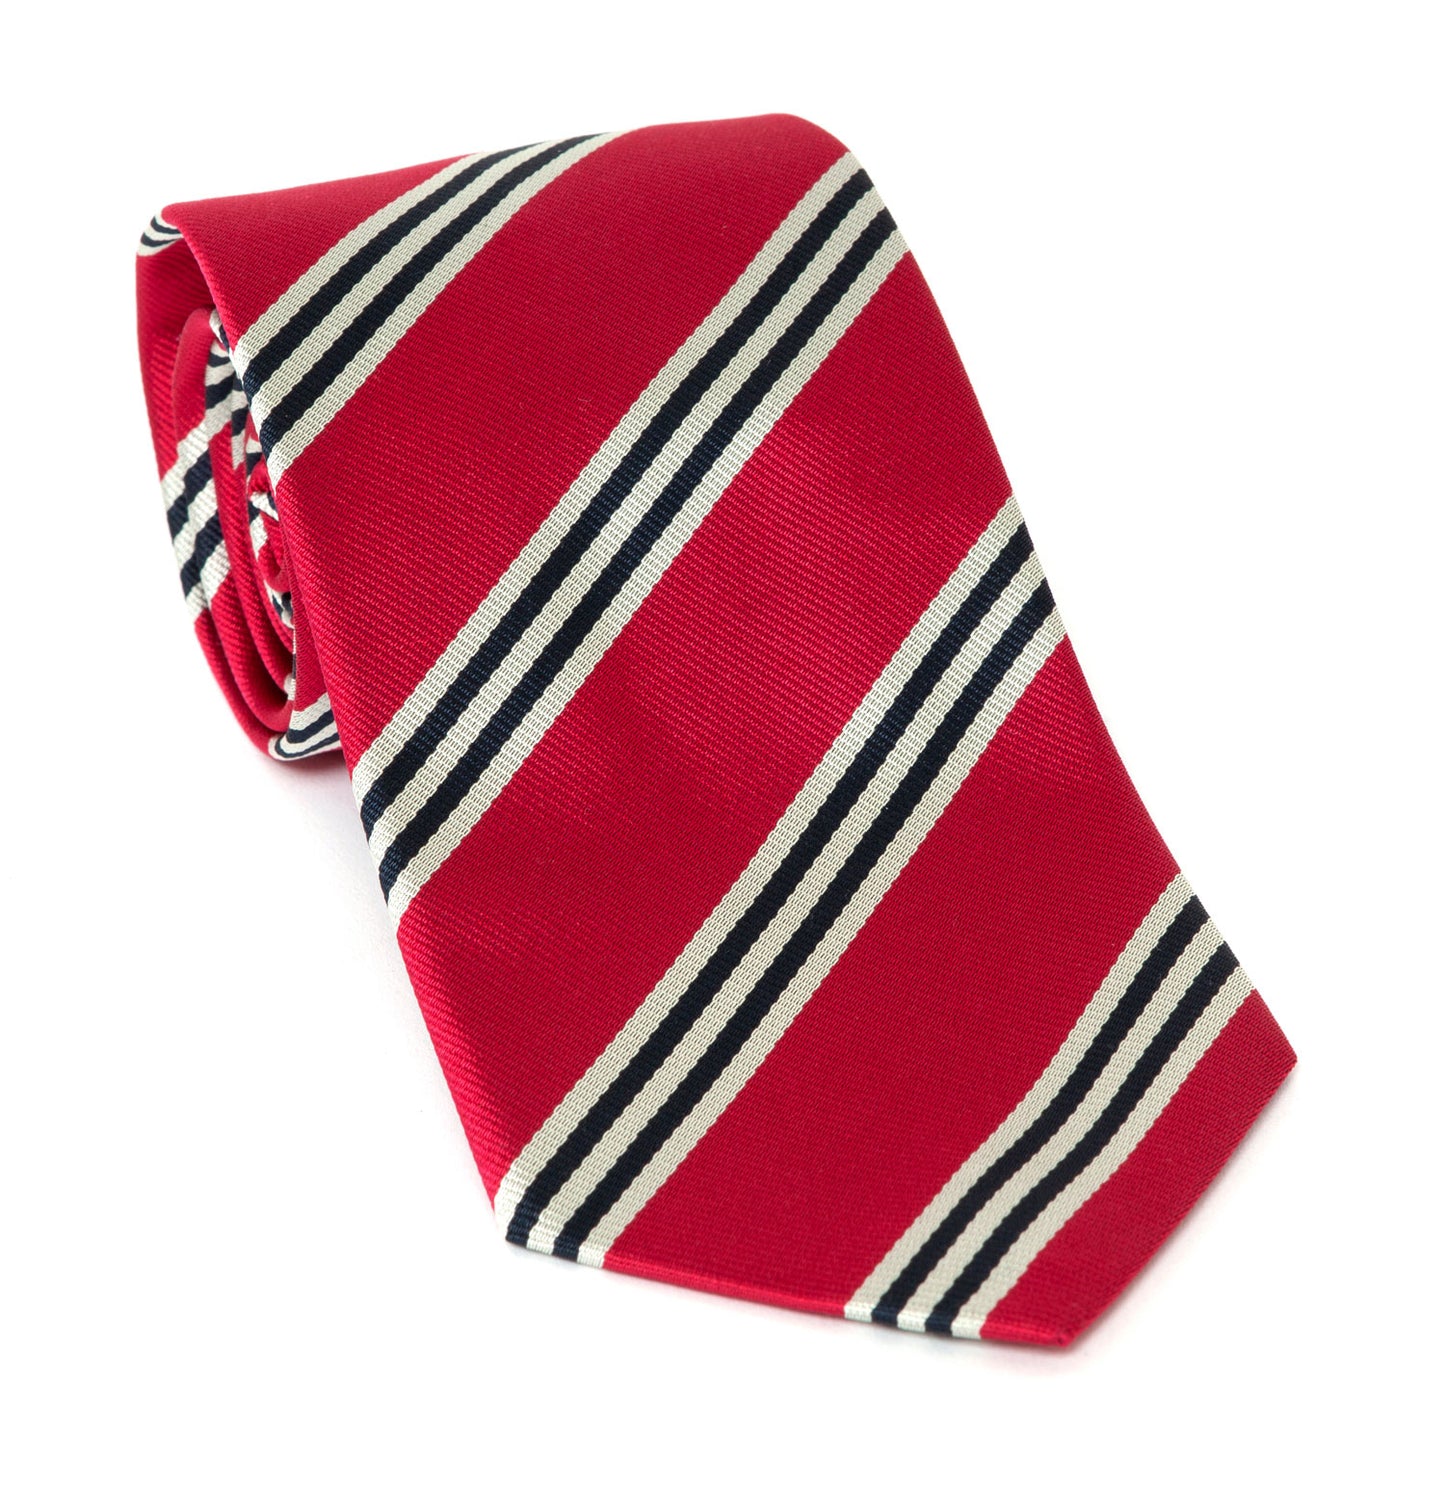 Regent Luxury Silk Tie - Red with White and Black Stripes - Regent Tailoring